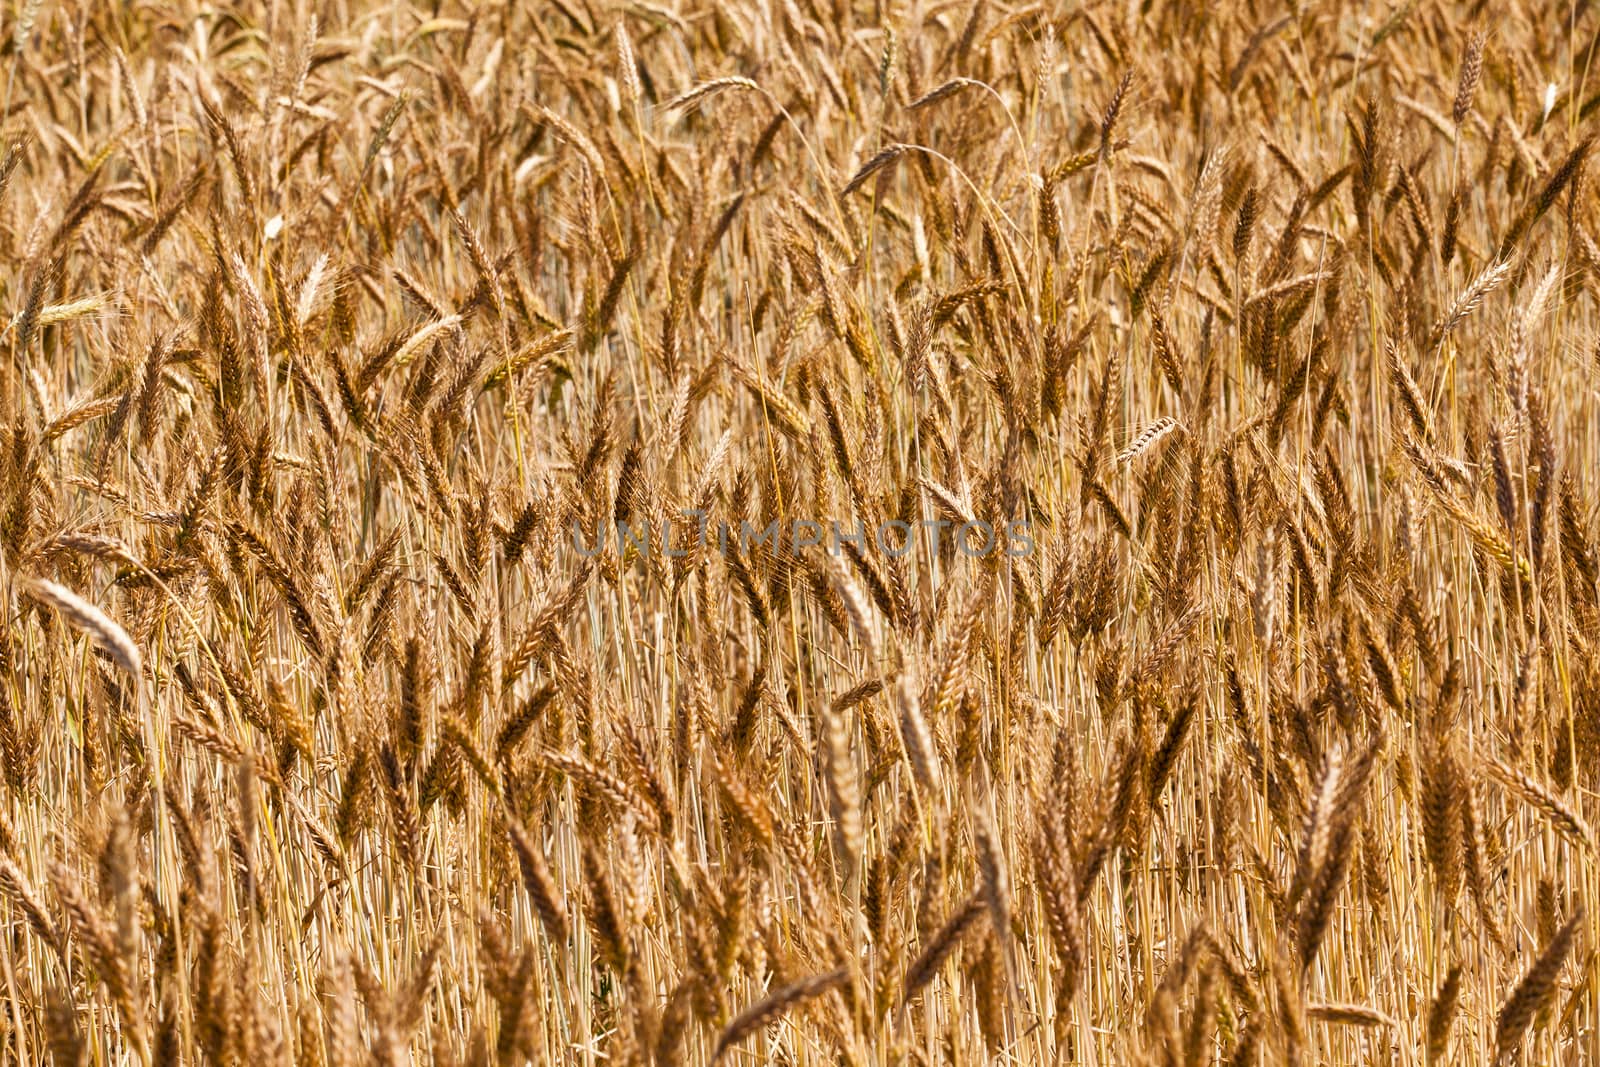  the ripened ears of cereals photographed by a close up